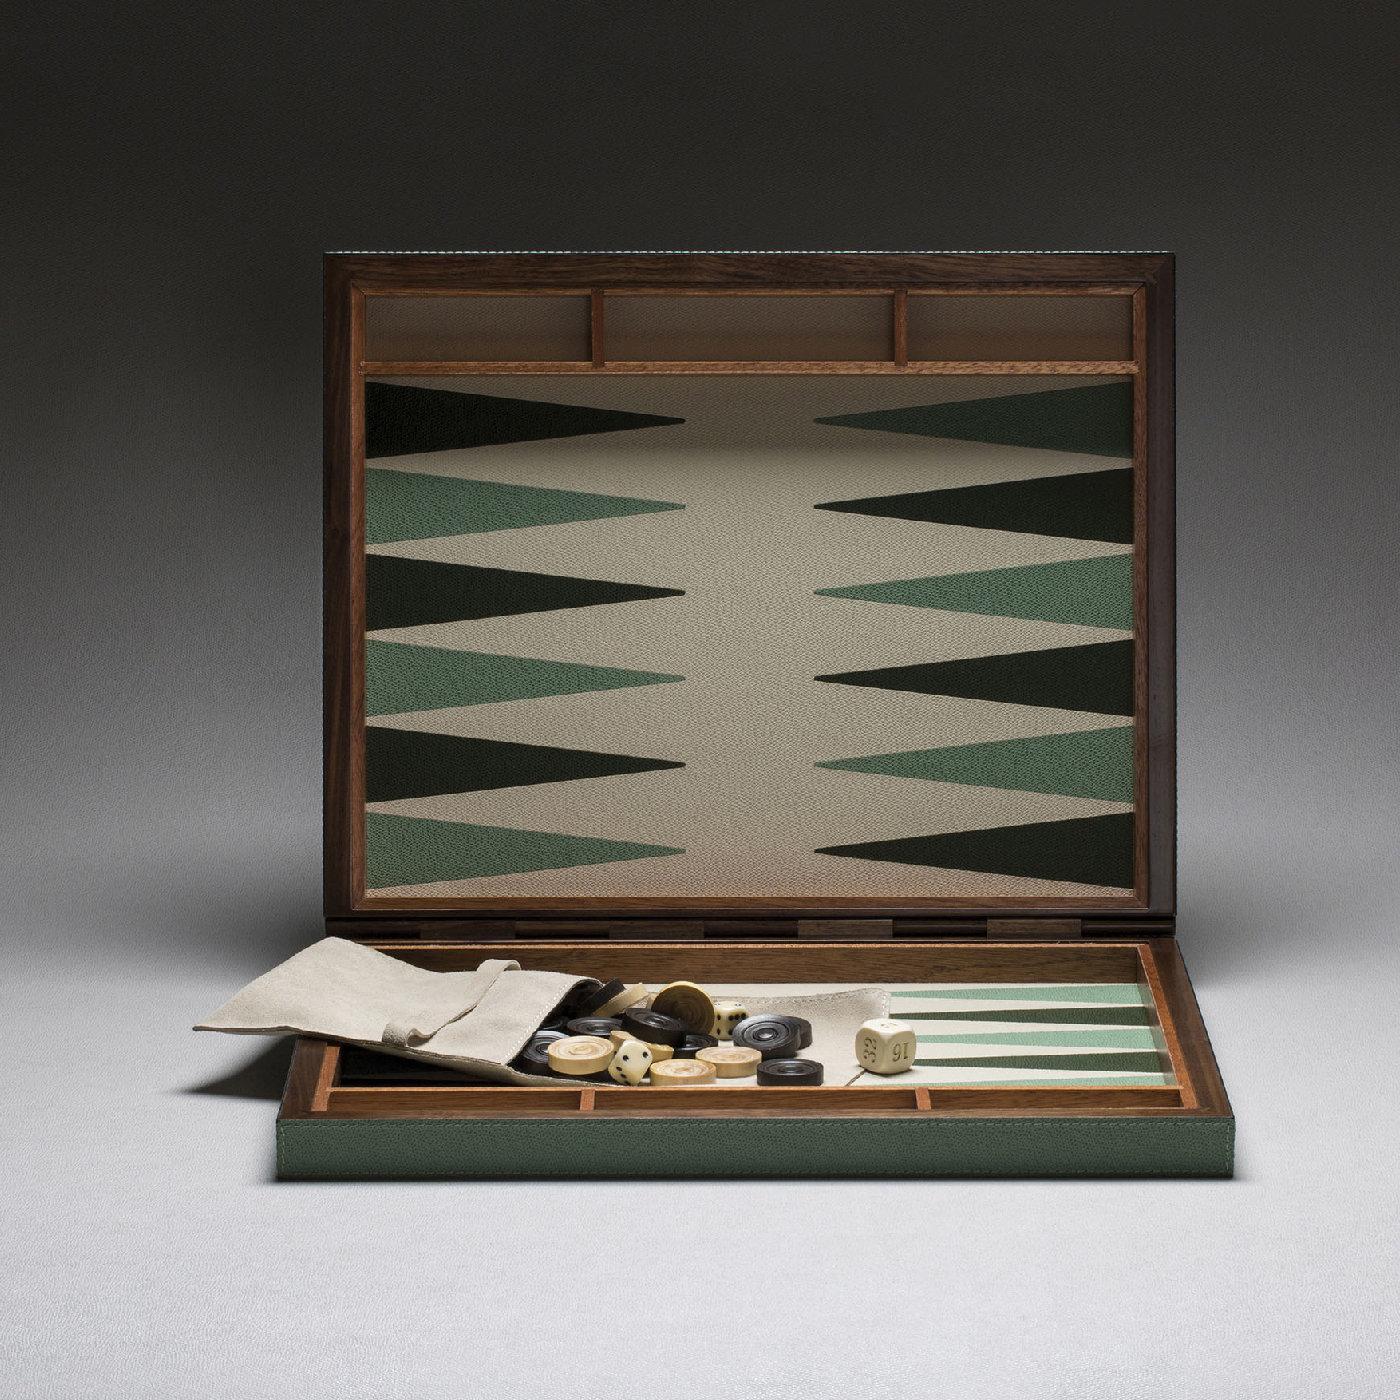 This elegant small backgammon case is made entirely in walnut wood and mahogany and uses walnut wood hinges. The playing surface is in inlaid leather and the color combination of the board can be customized. Checkers in boxwood and dice are